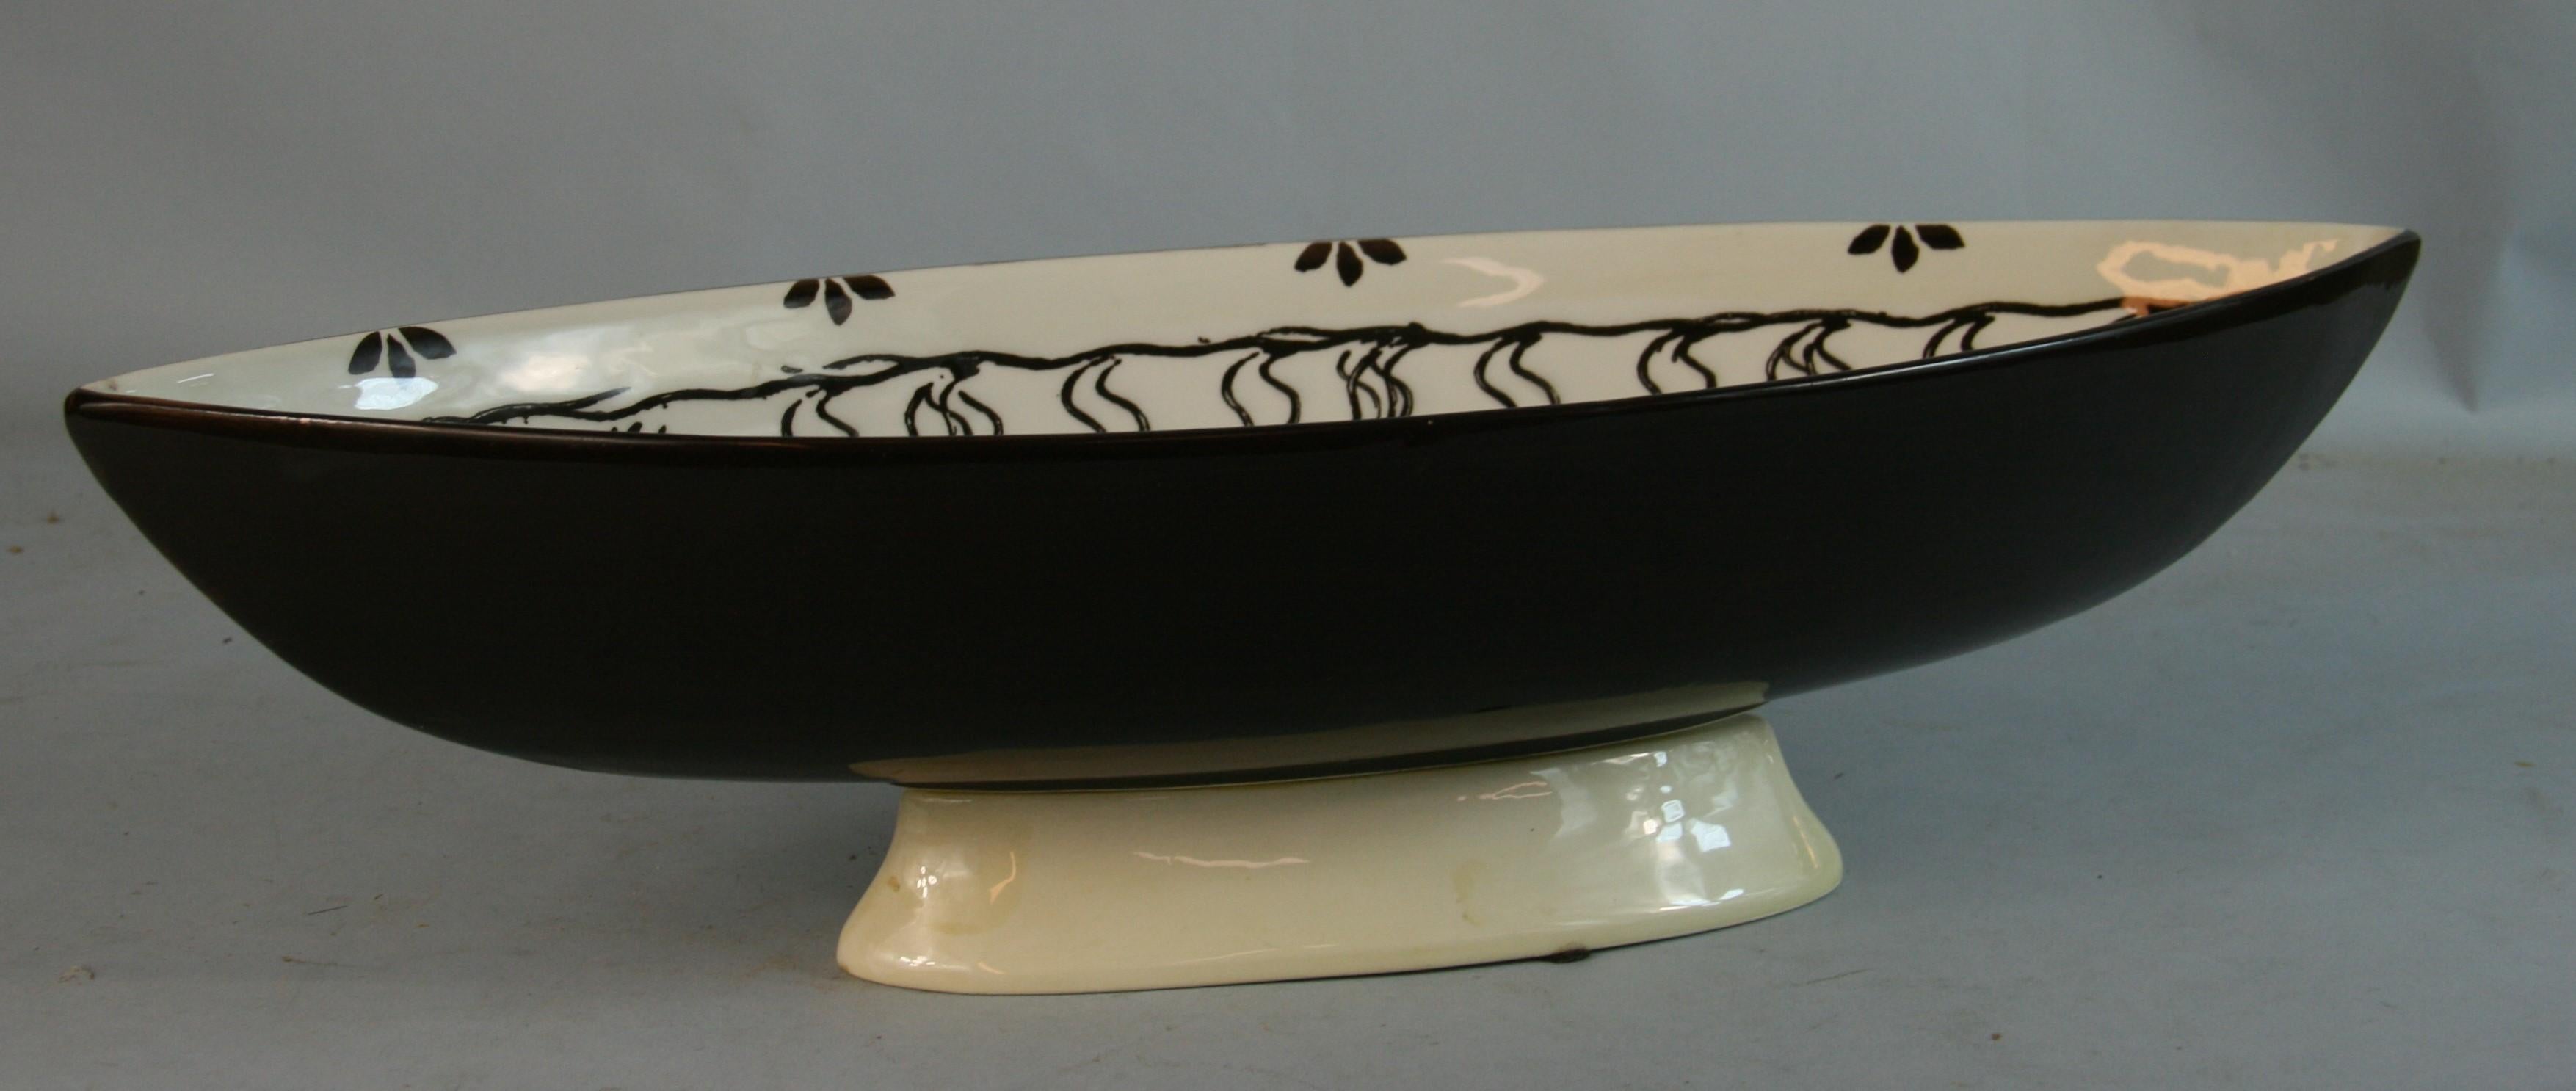 Hand-Painted Italian Hand Decorated Boat Shaped Centerpiece by Antica Fornace